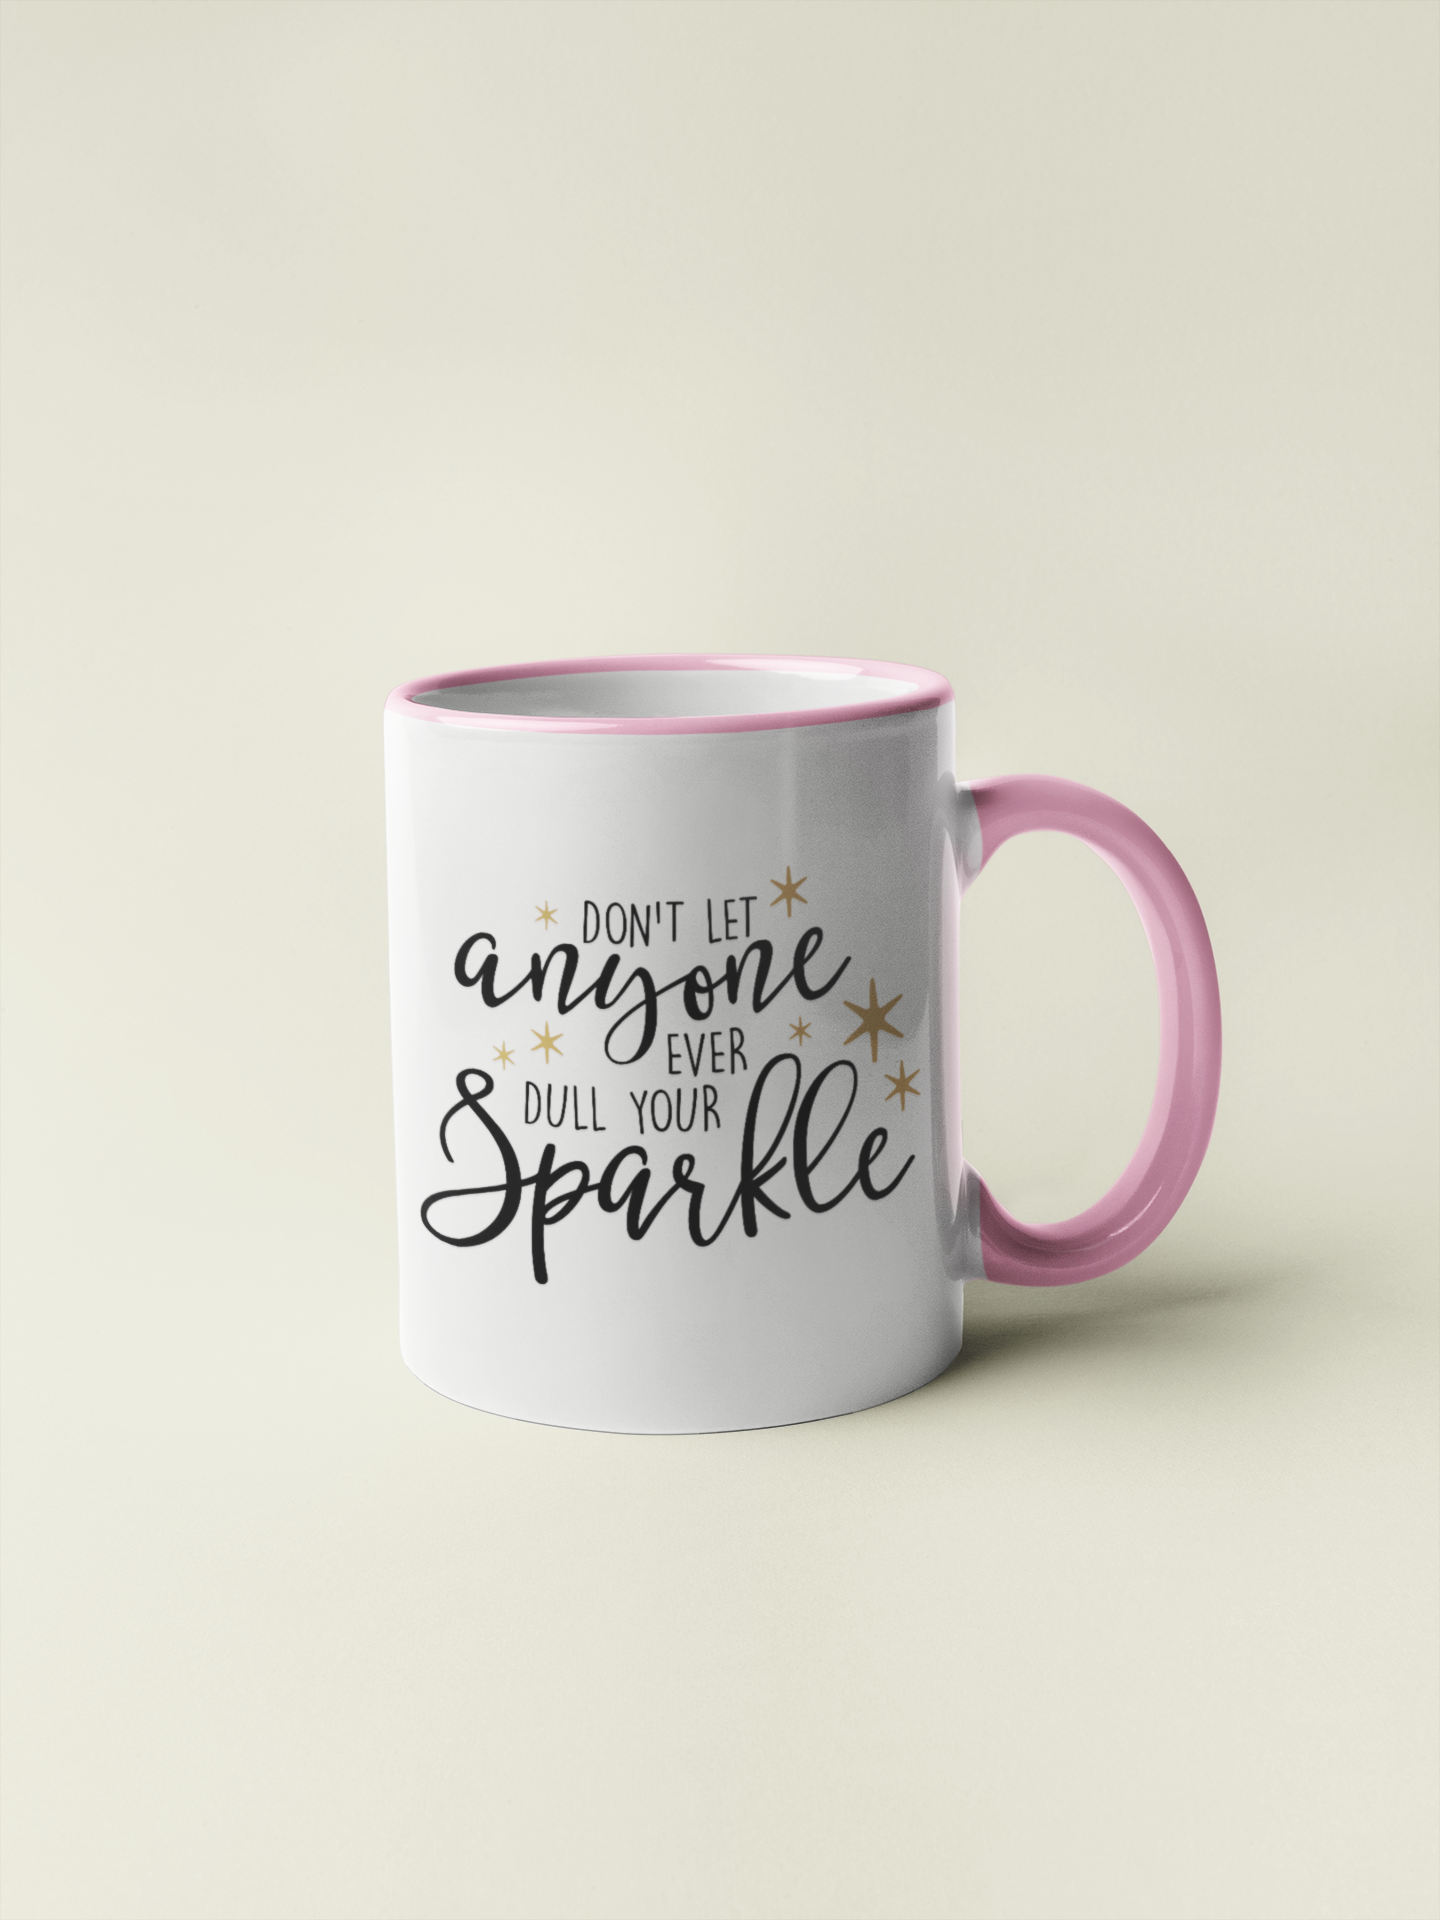 White mug with a pink handle & inner with the quote don't let anyone ever dull your sparkle, in a fancy font & surrounded by gold stars.